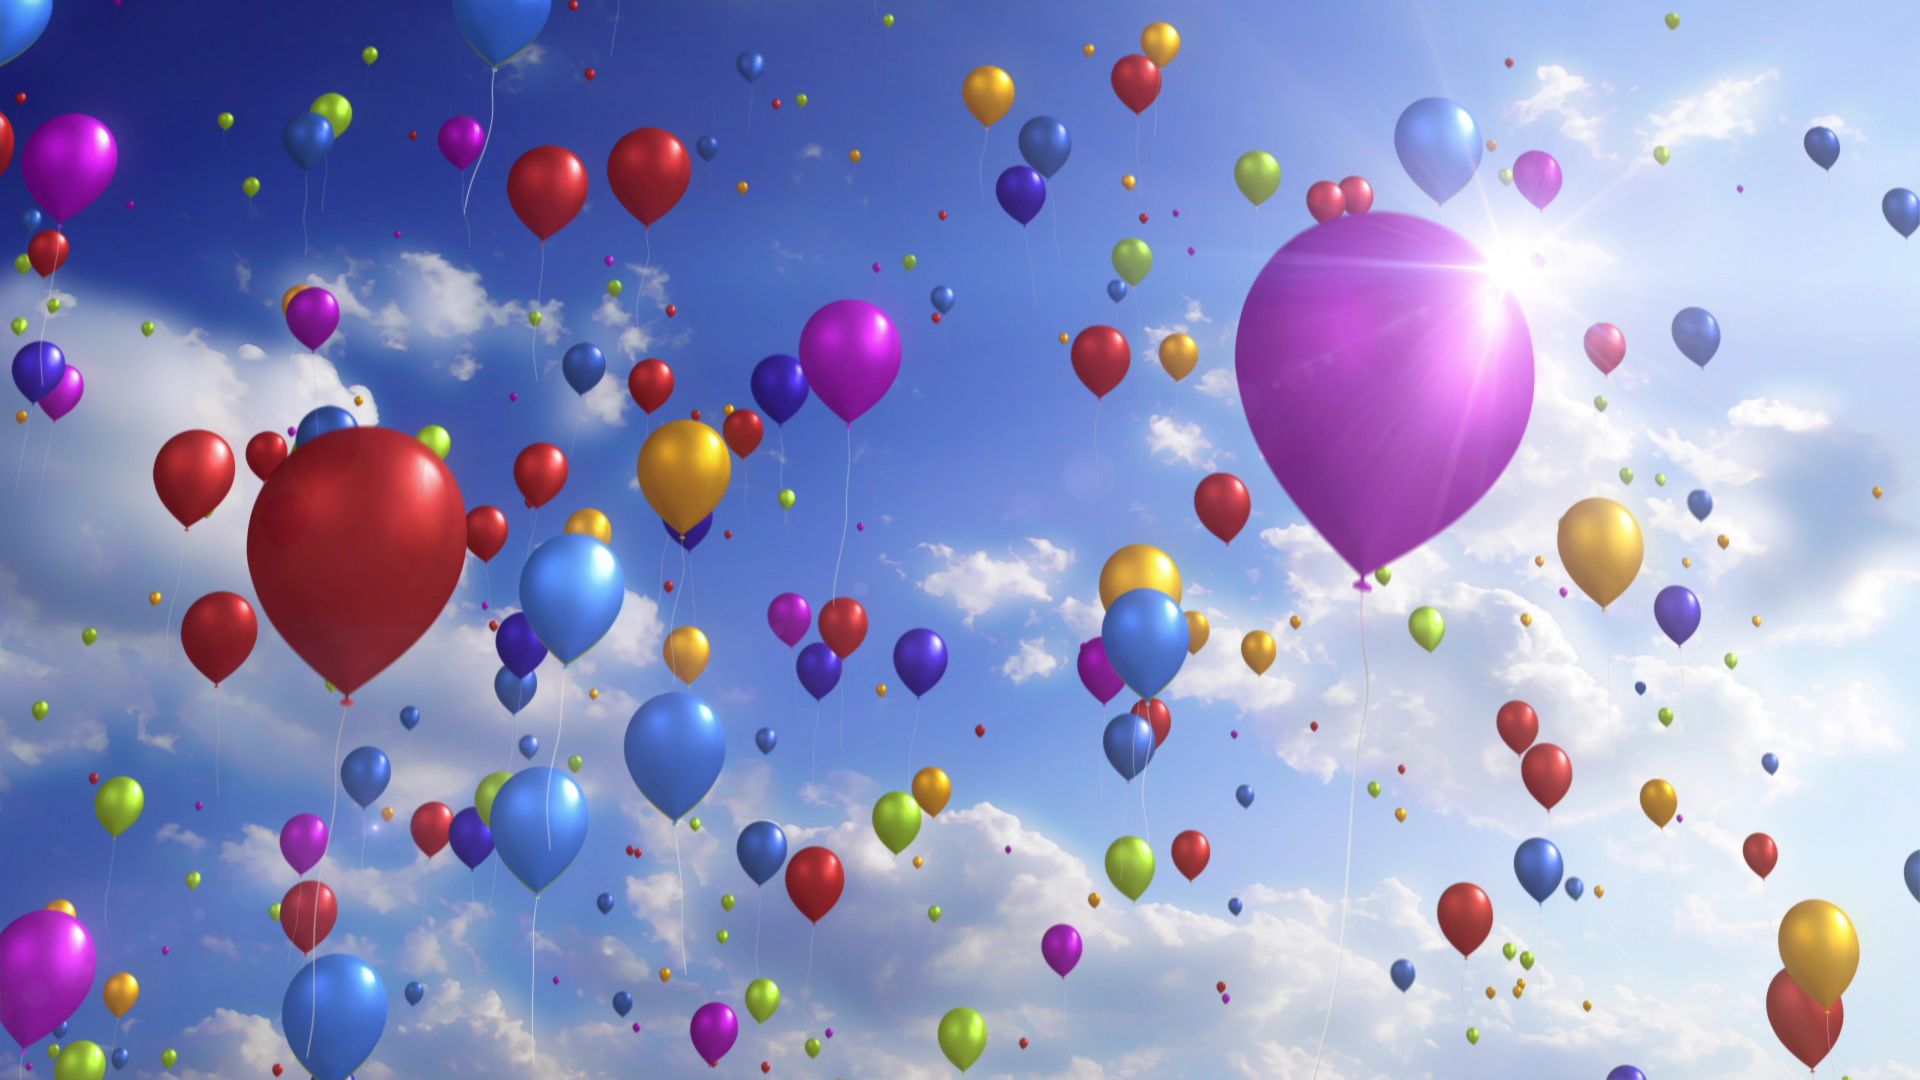 Colorful Balloons | downloops – Creative Motion Backgrounds